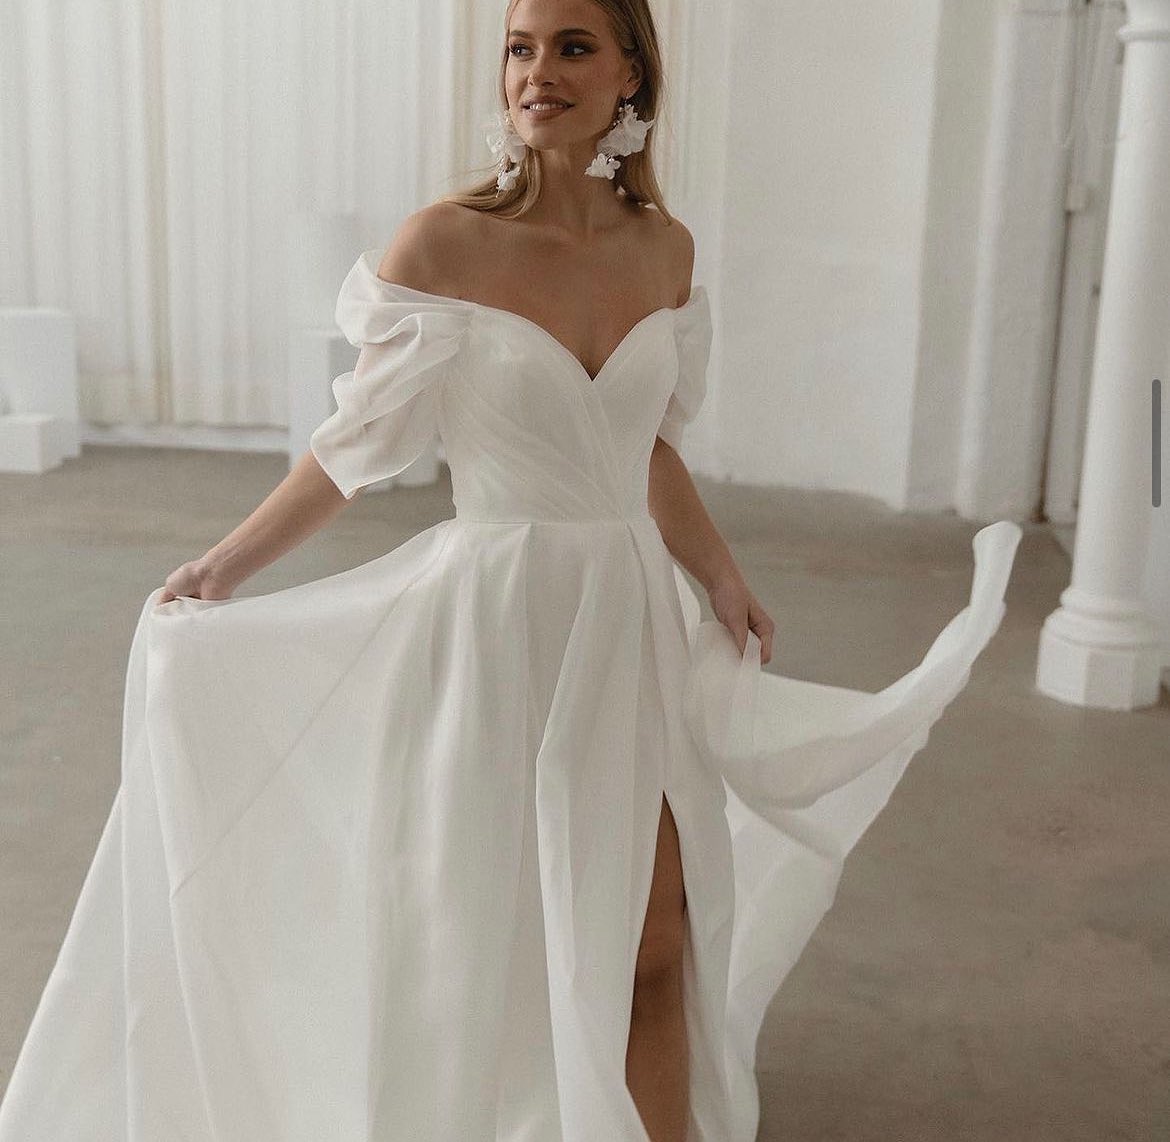 To view the newest @madilanebridal collection make sure you have booked your appointment at their Trunk Show on Saturday 11th May! An event not to be missed 💕

#wedding #weddingdress #offtheshoulderweddingdress #bride #bridetobe #engaged #newlyengaged #nottinghambride